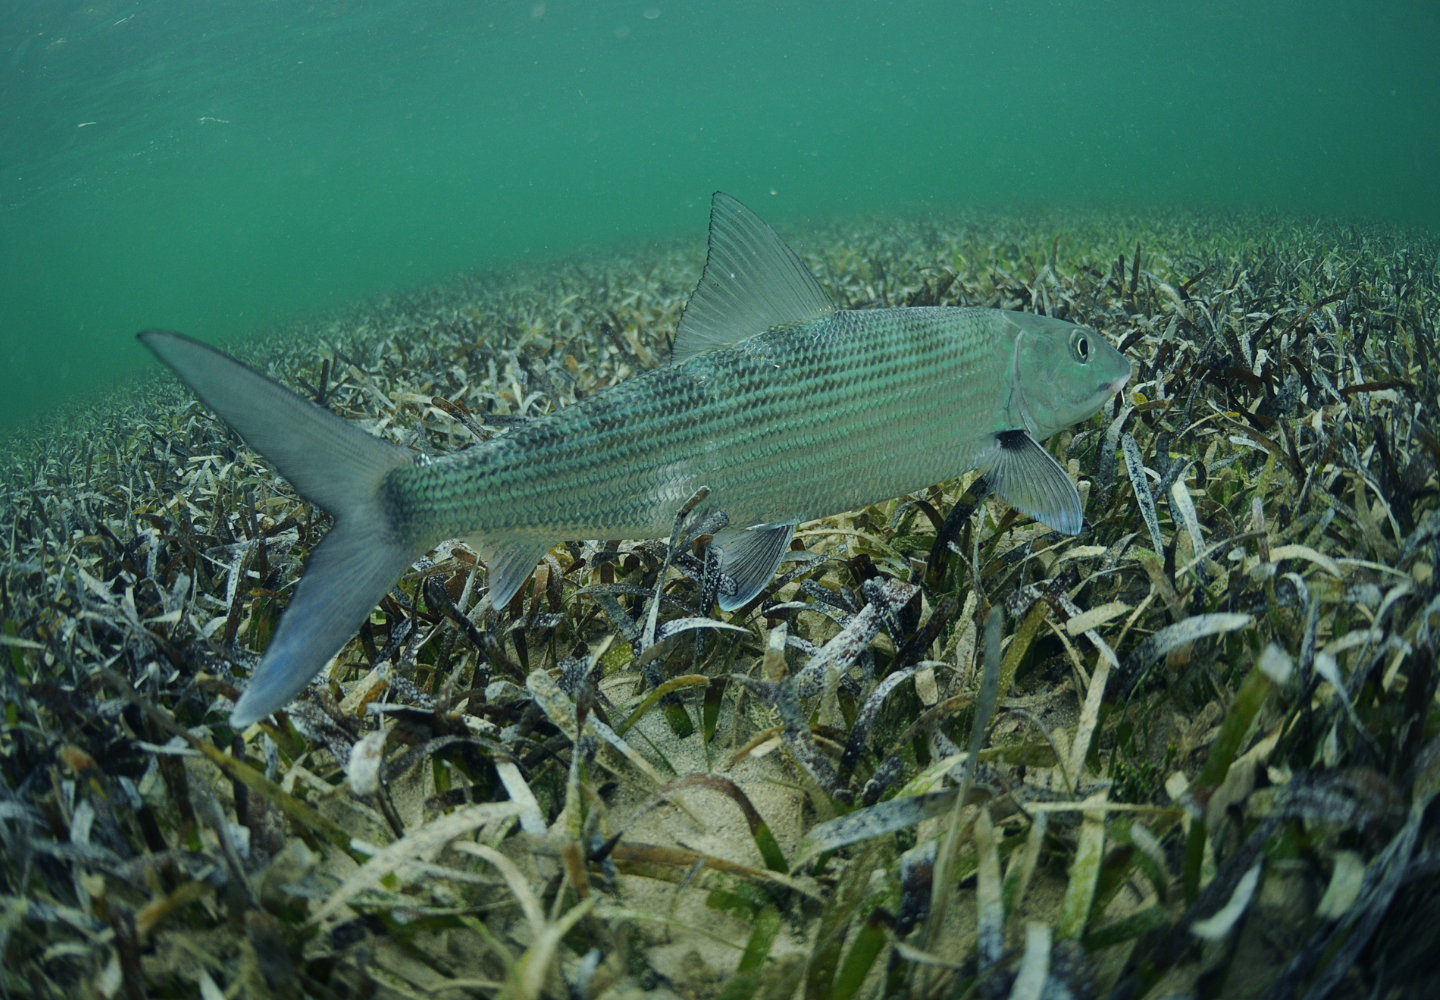 bonefish swims over a bed of grass